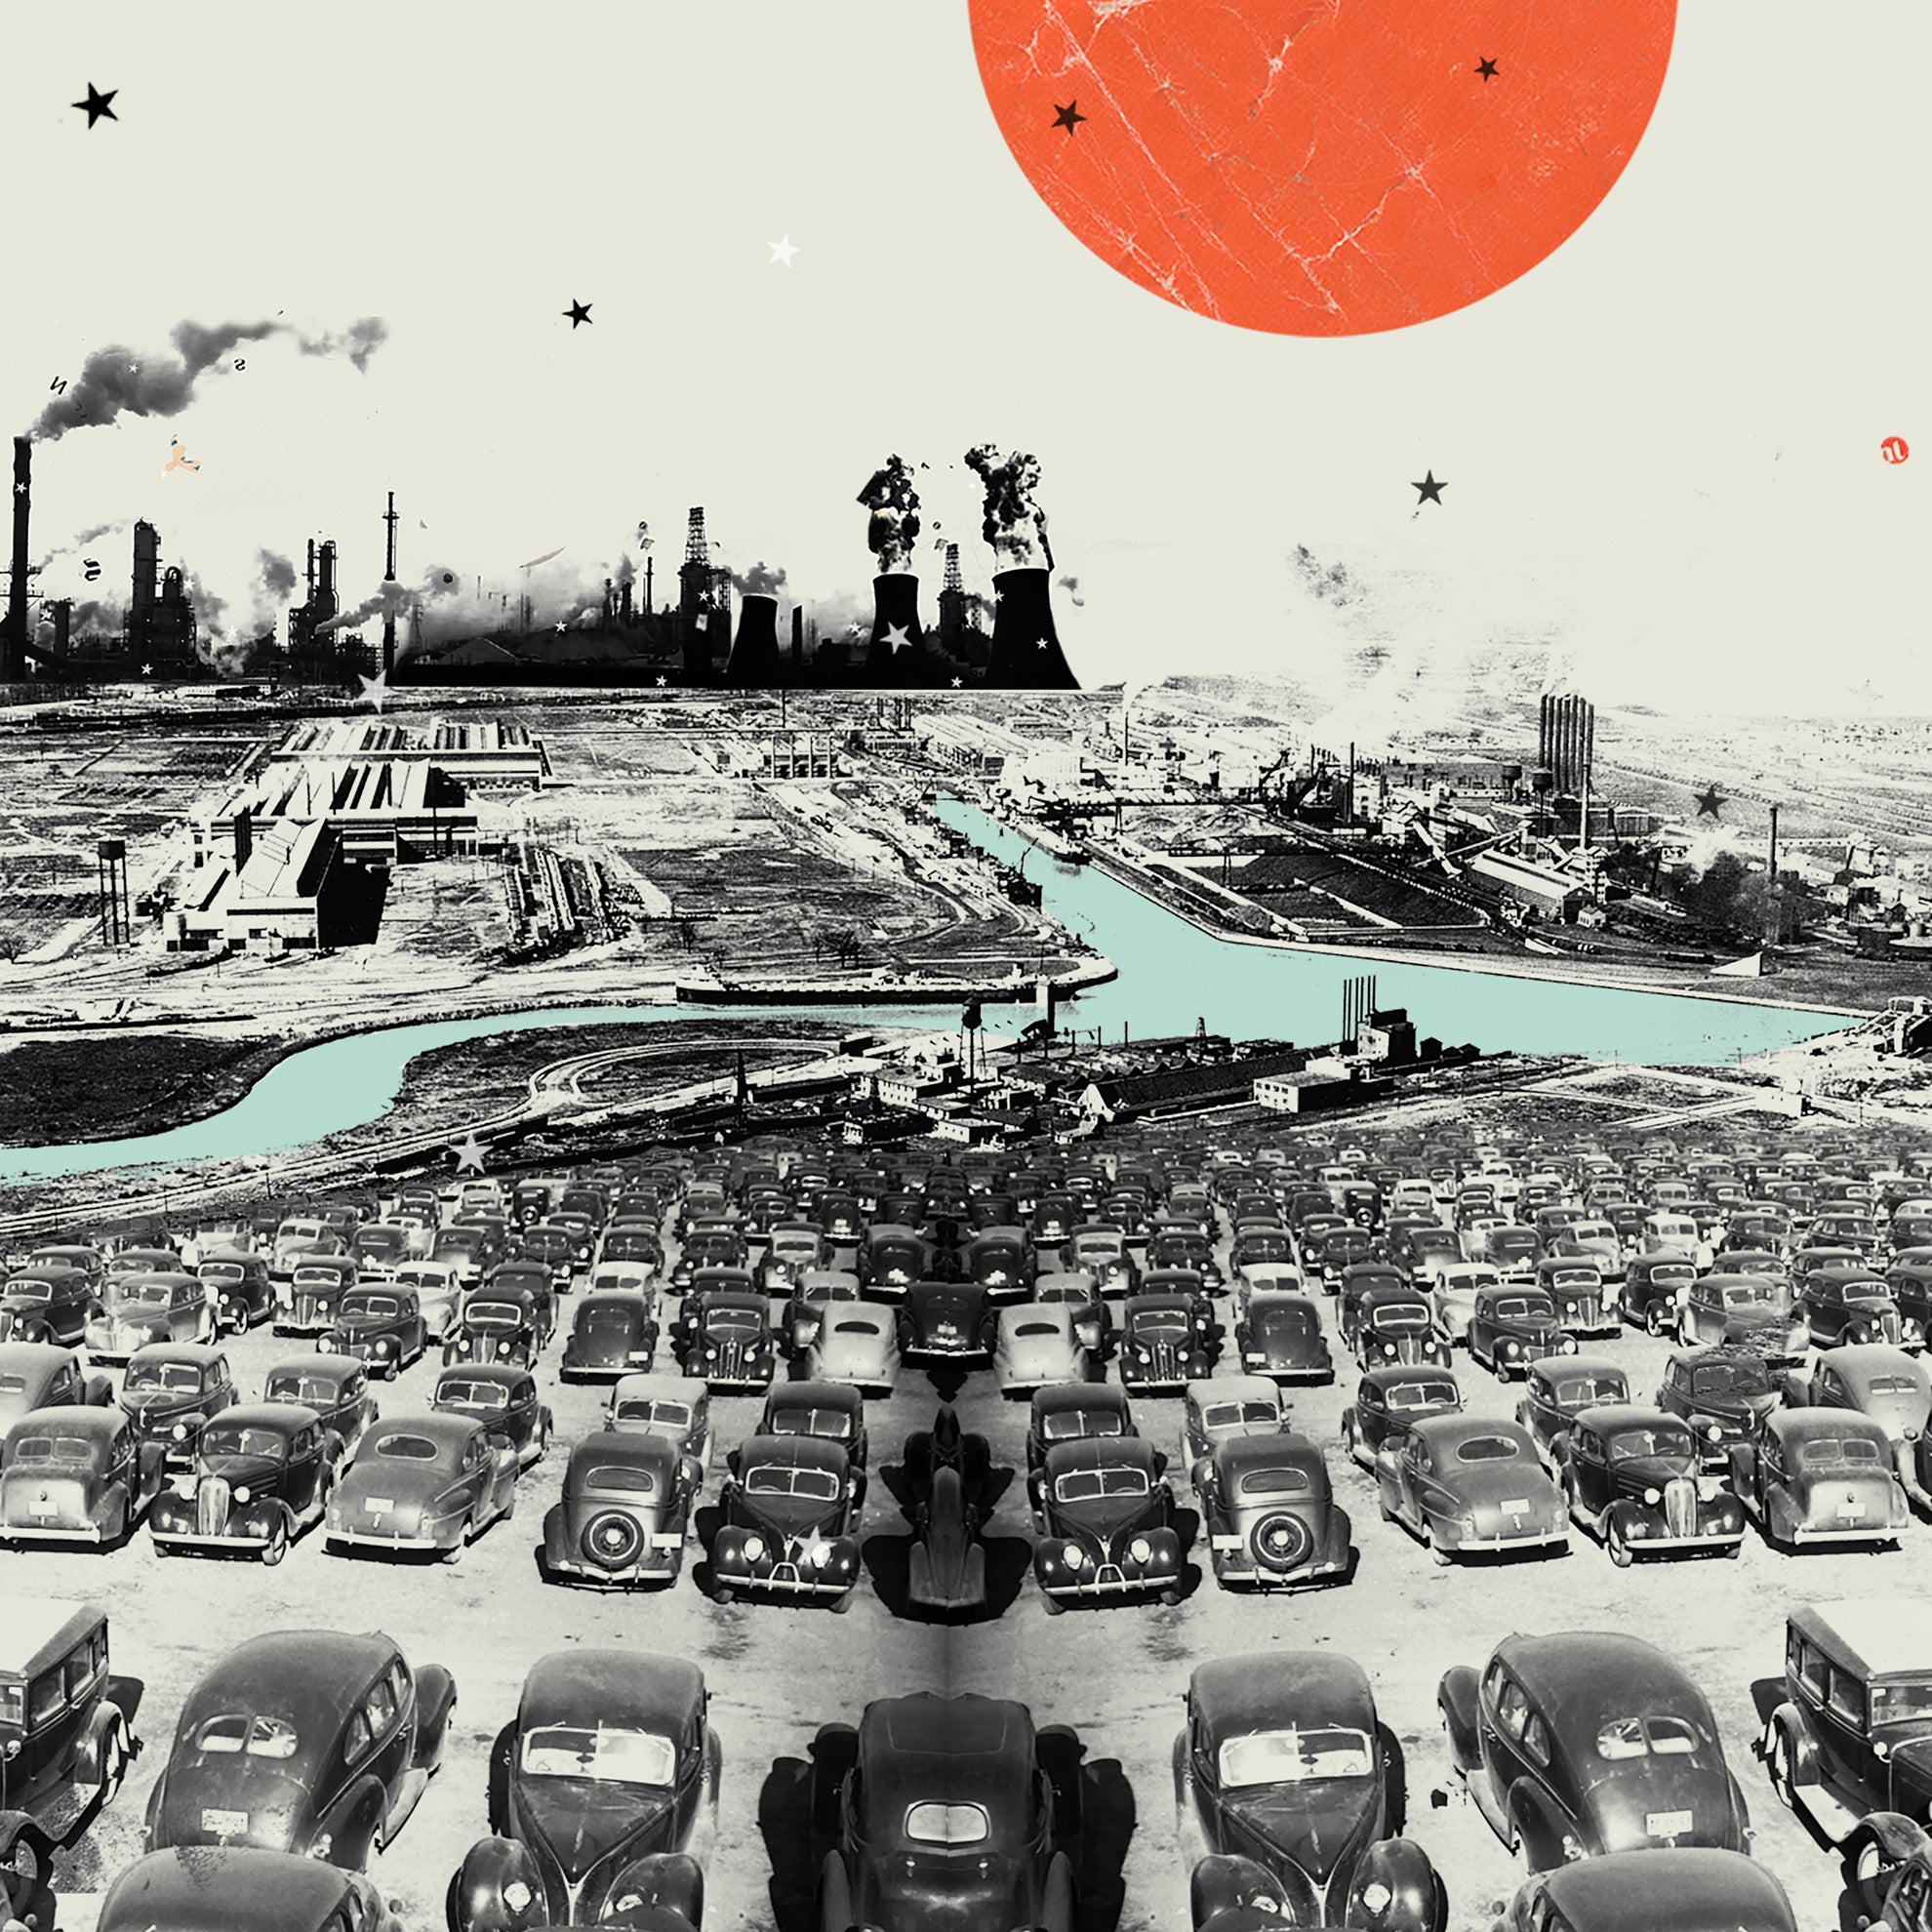 Photo illustration of black and white cars, with black and white refineries in background. Bright orange sun. Mint green waterway.